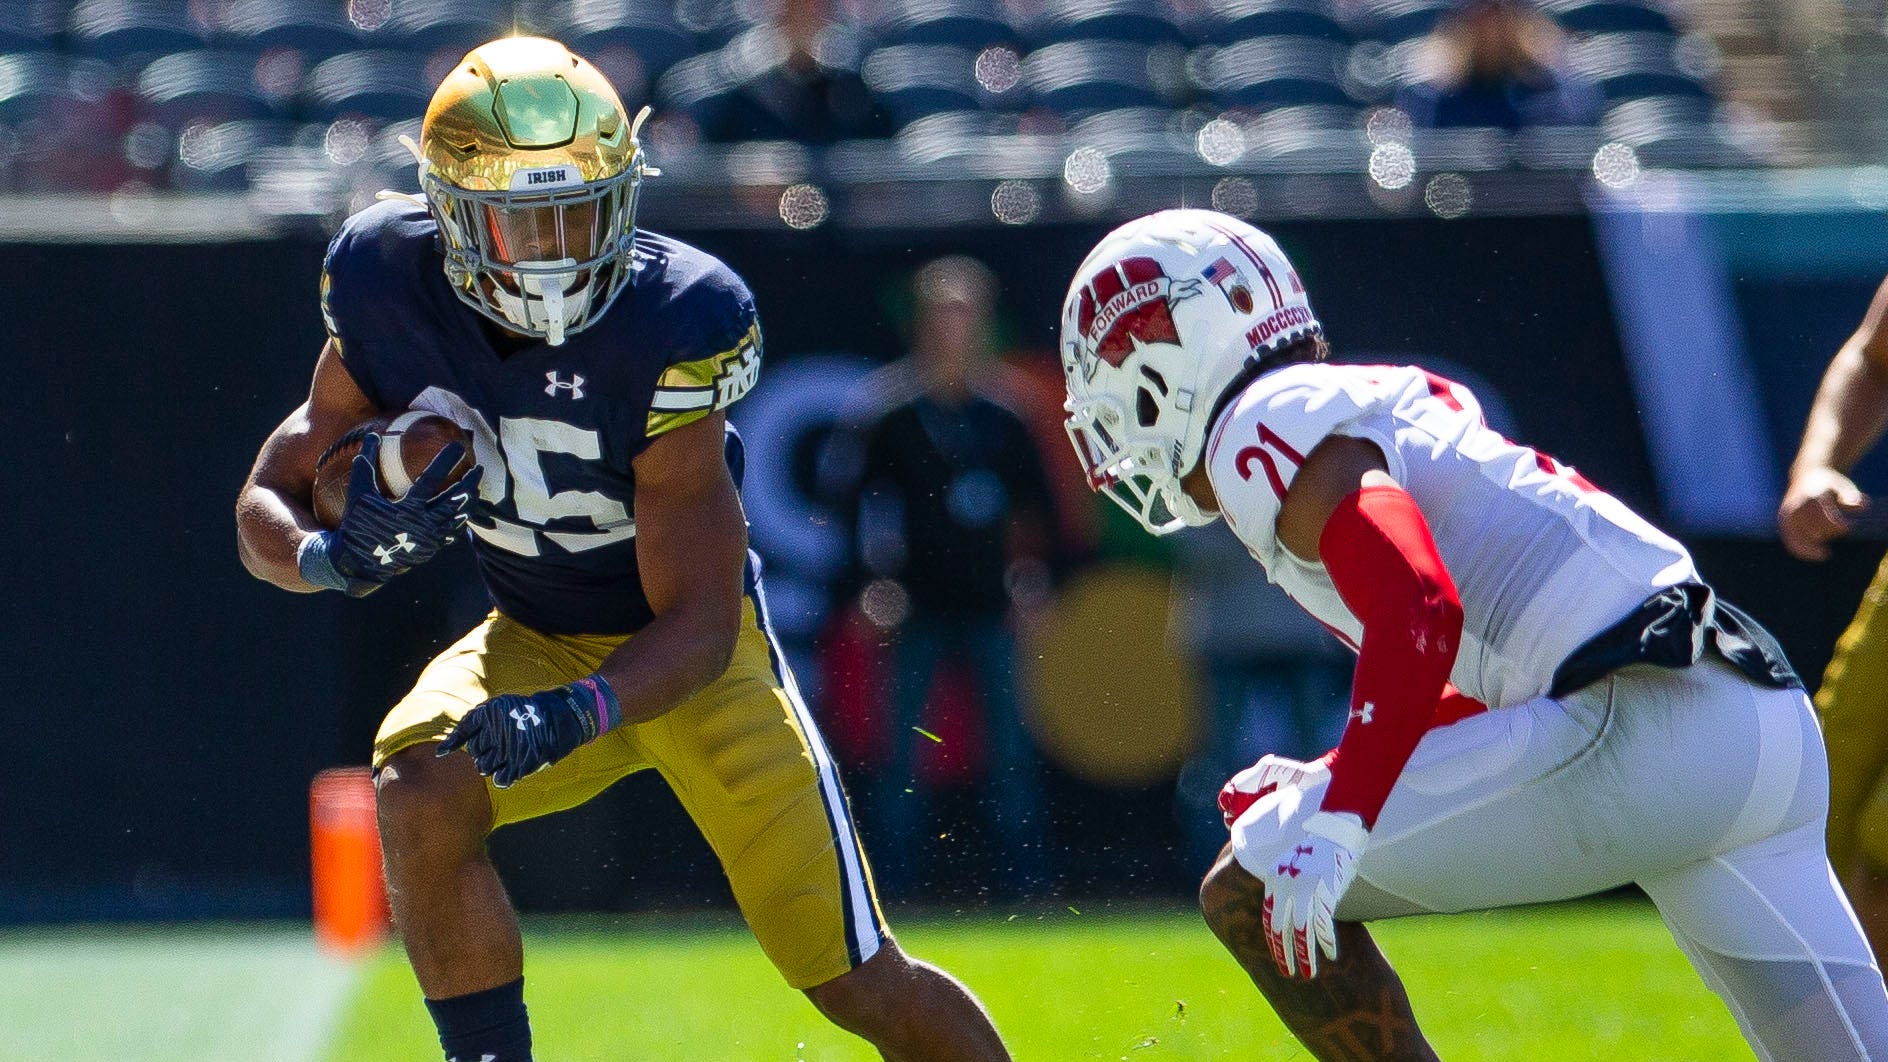 Notre Dame running back/returner Chris Tyree healthy to play vs. UNC